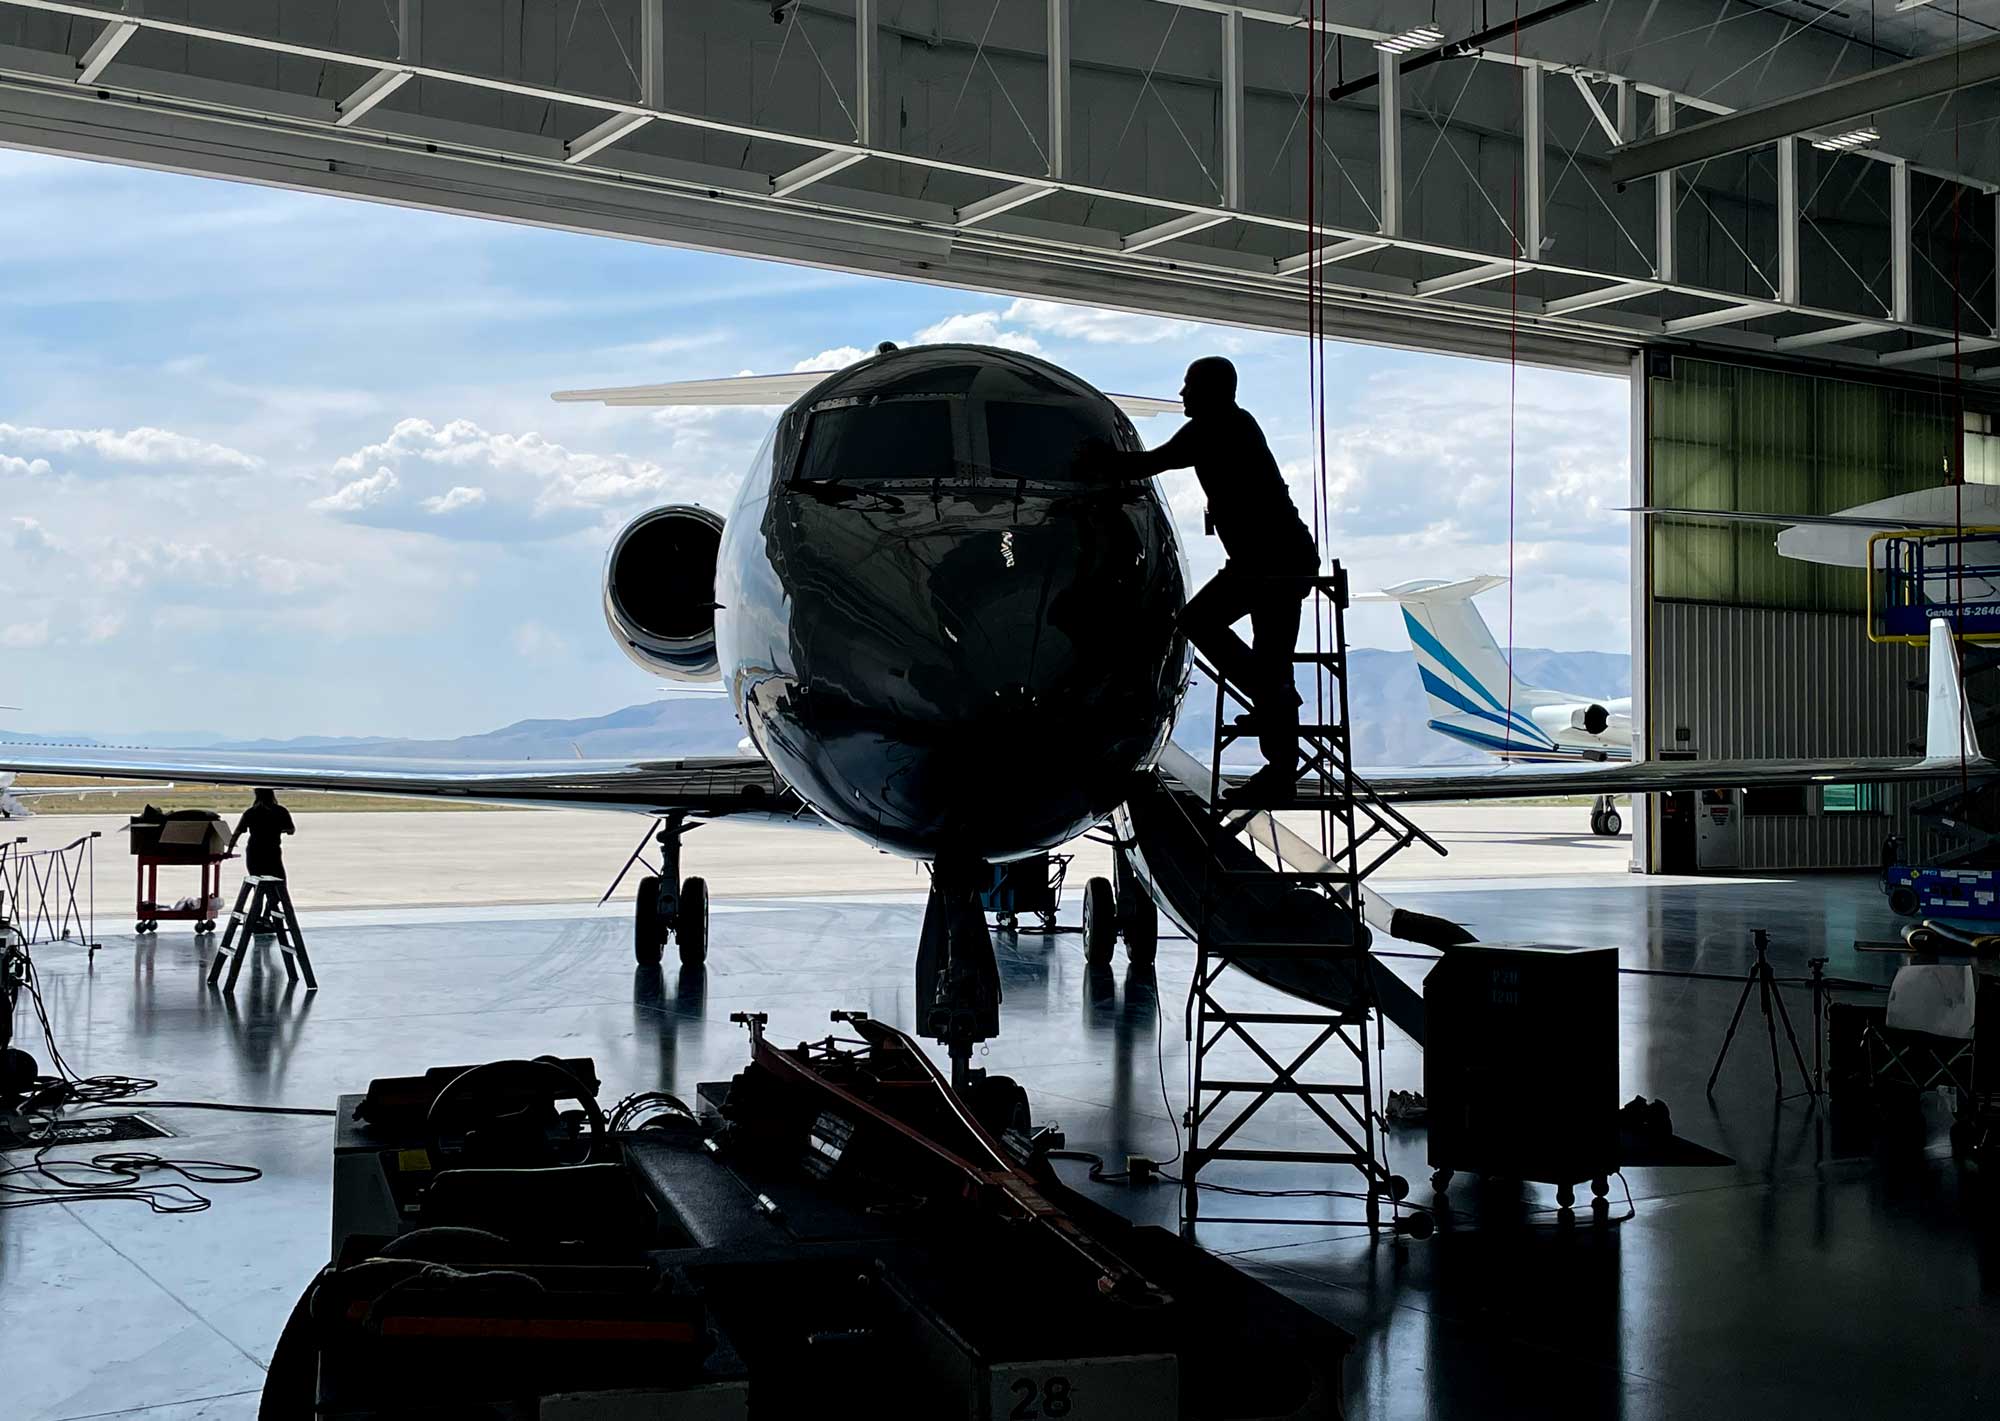 Setting Up For Aviation Photography